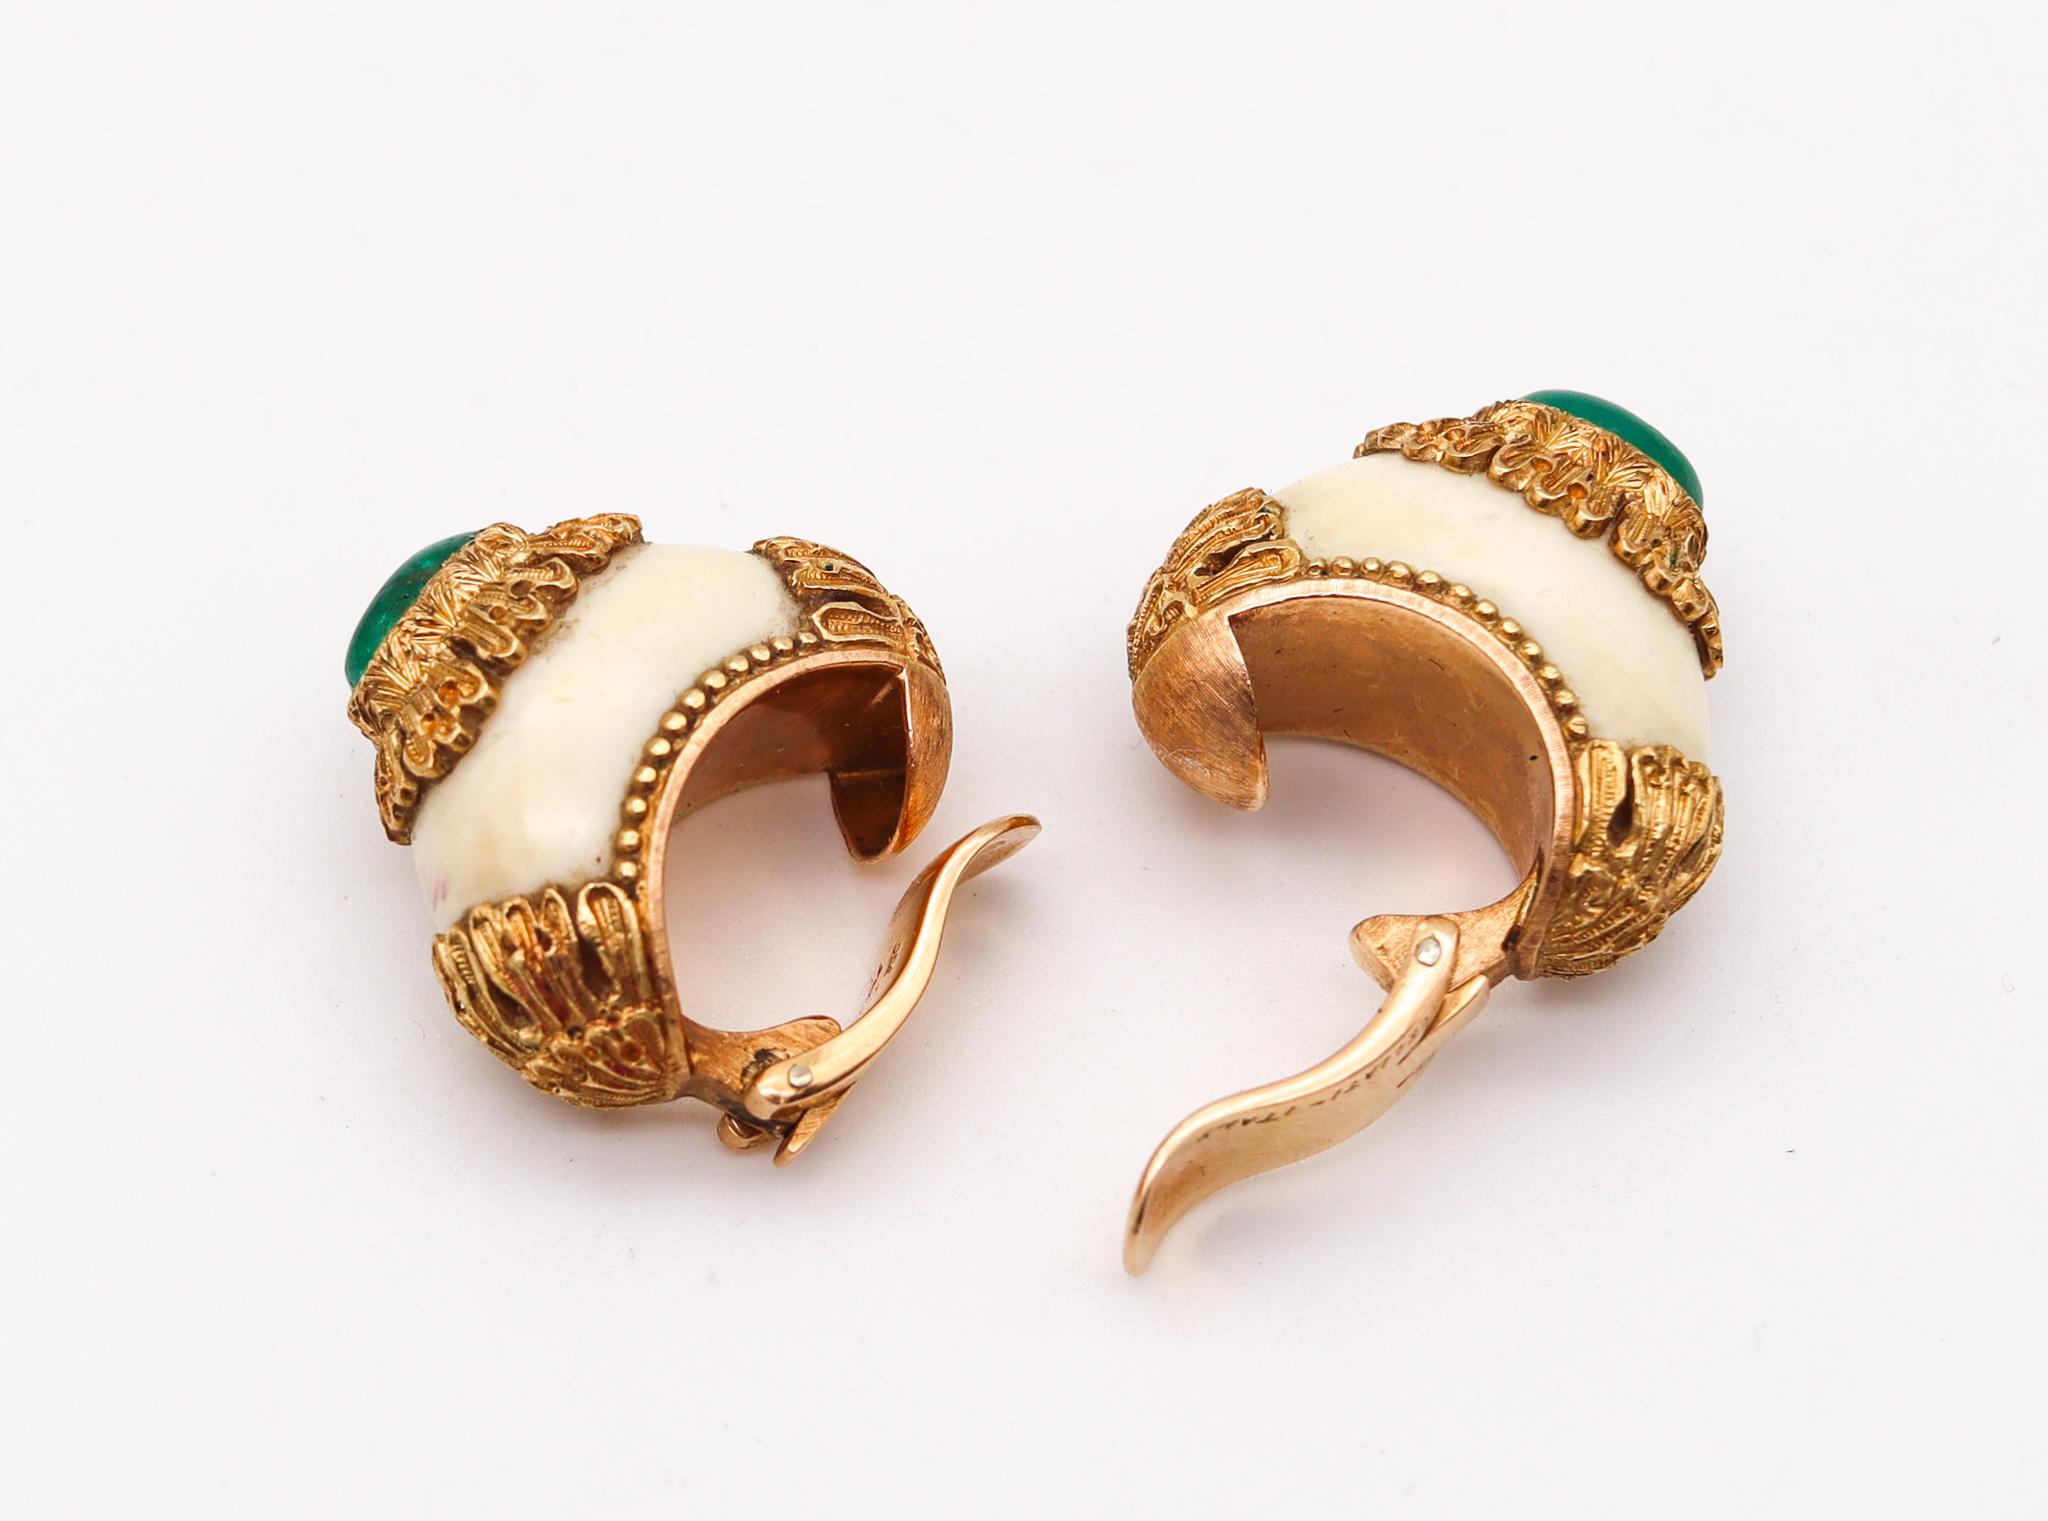 Cabochon Mario Buccellati 1970 Clips Earrings in 18Kt Yellow Gold with 2.62 Ctw Emeralds